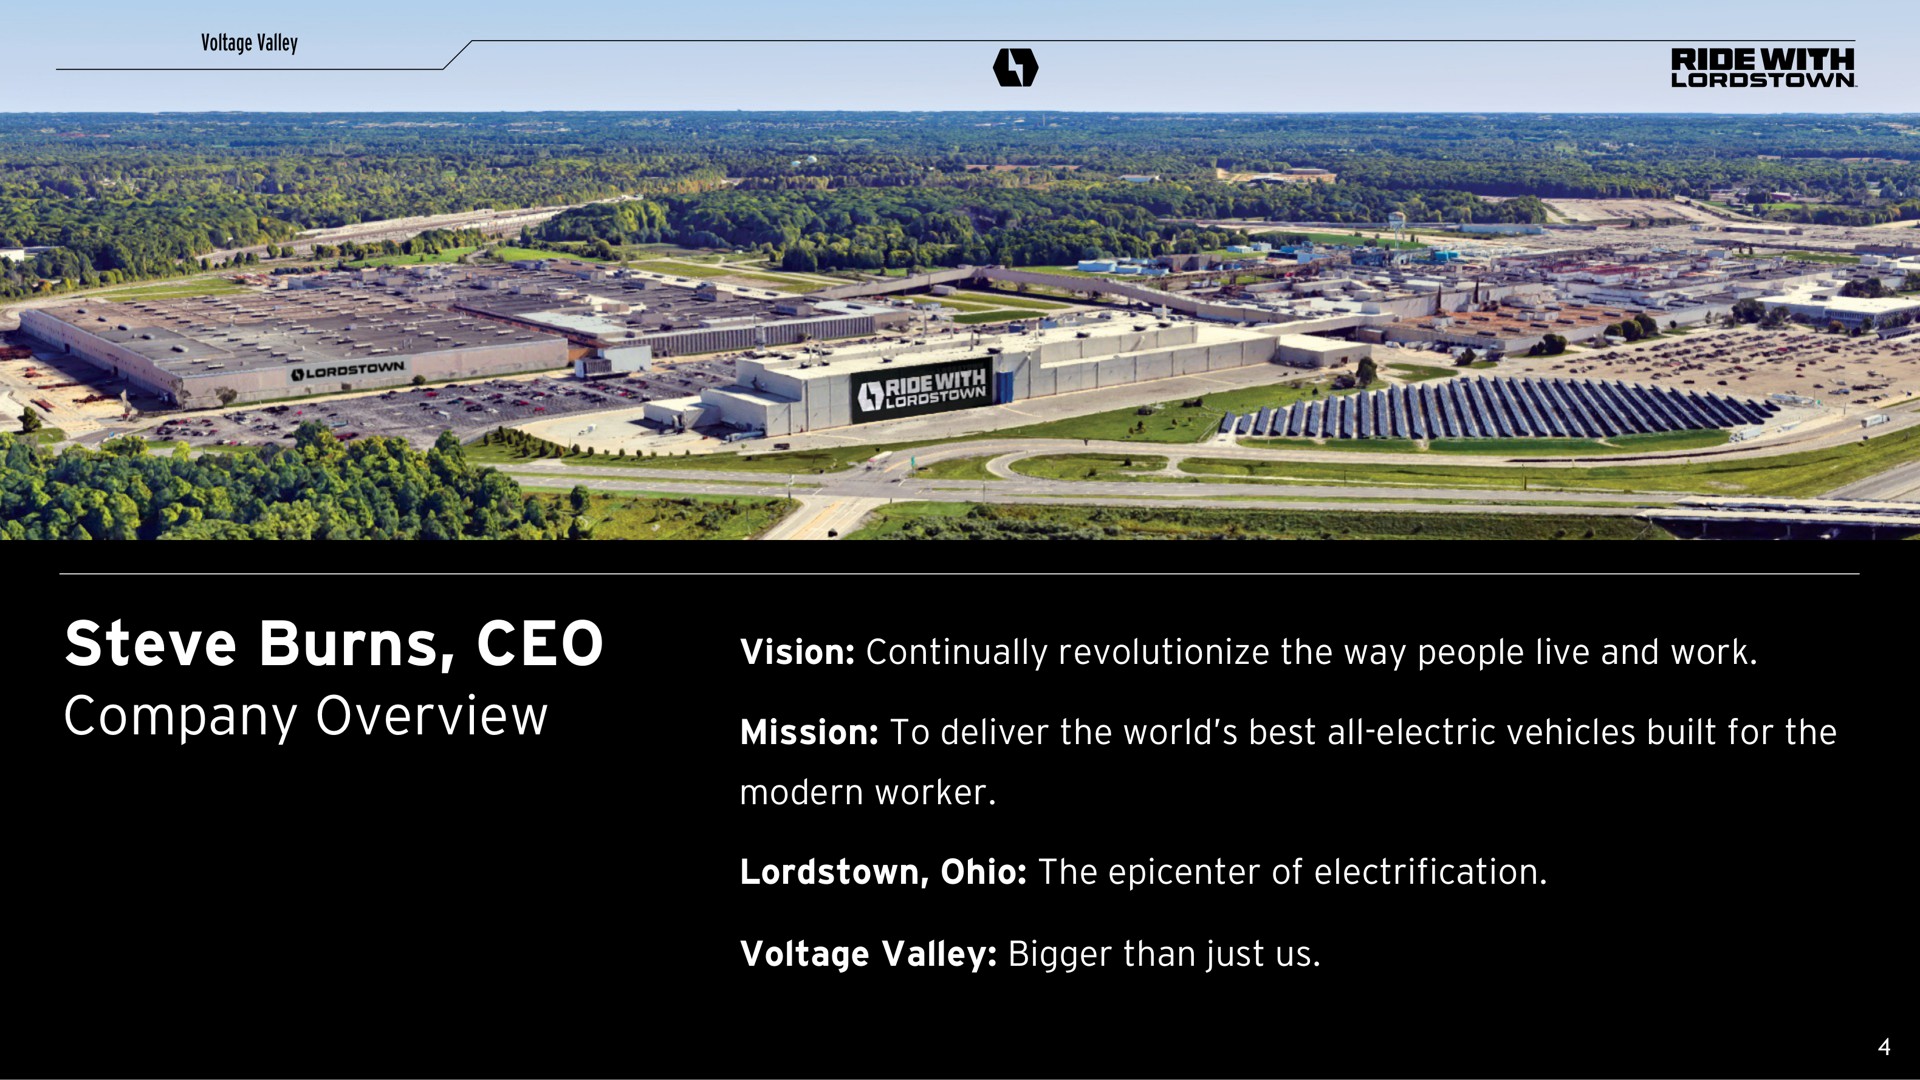 burns company overview vision continually revolutionize the way people live and work mission to deliver the world best all electric vehicles built for the modern worker the epicenter of electrification voltage valley bigger than just us ride with | Lordstown Motors